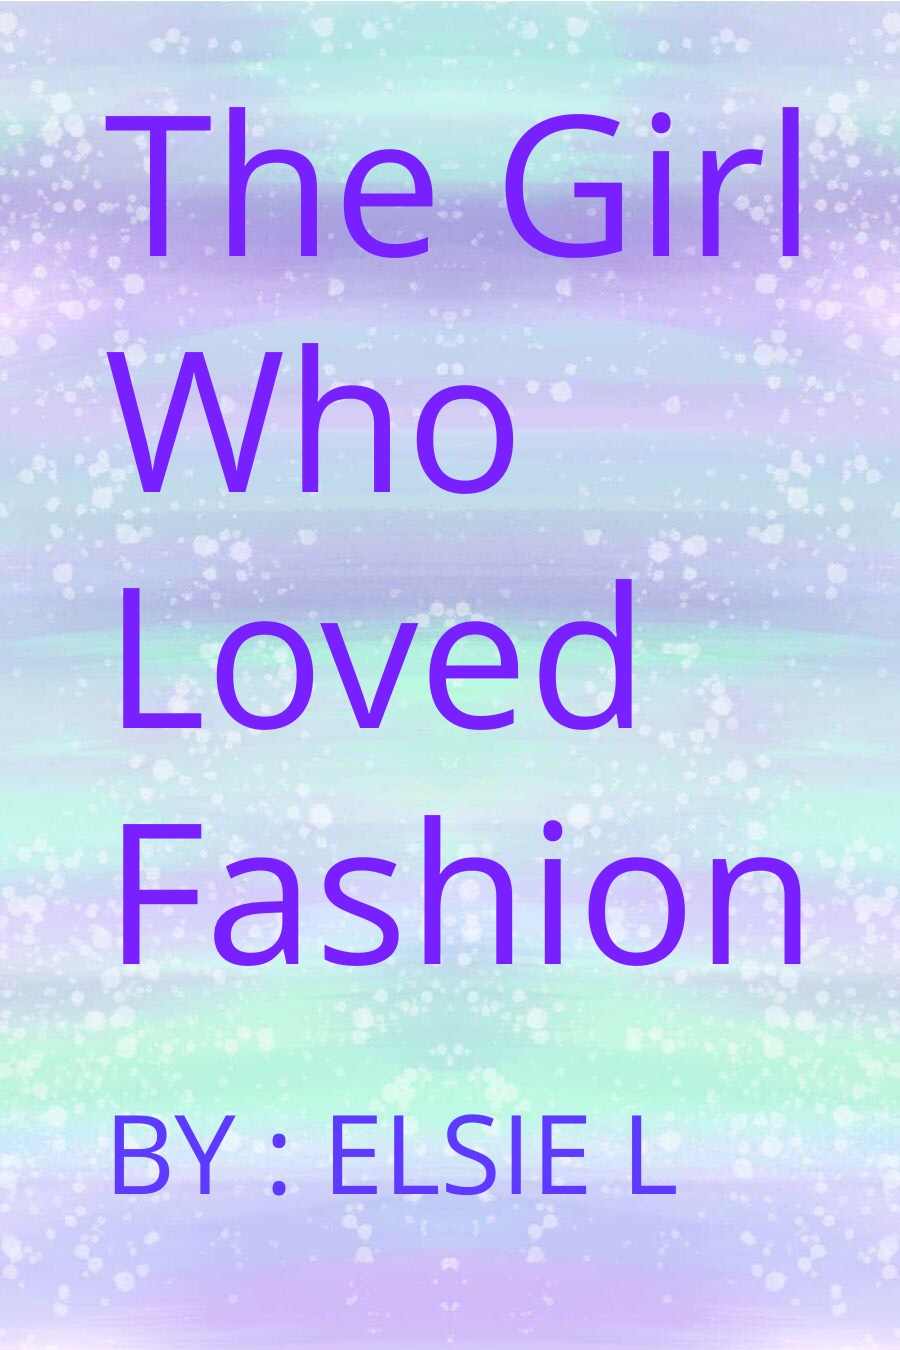 The Girl Who Loved Fashion by Elise L